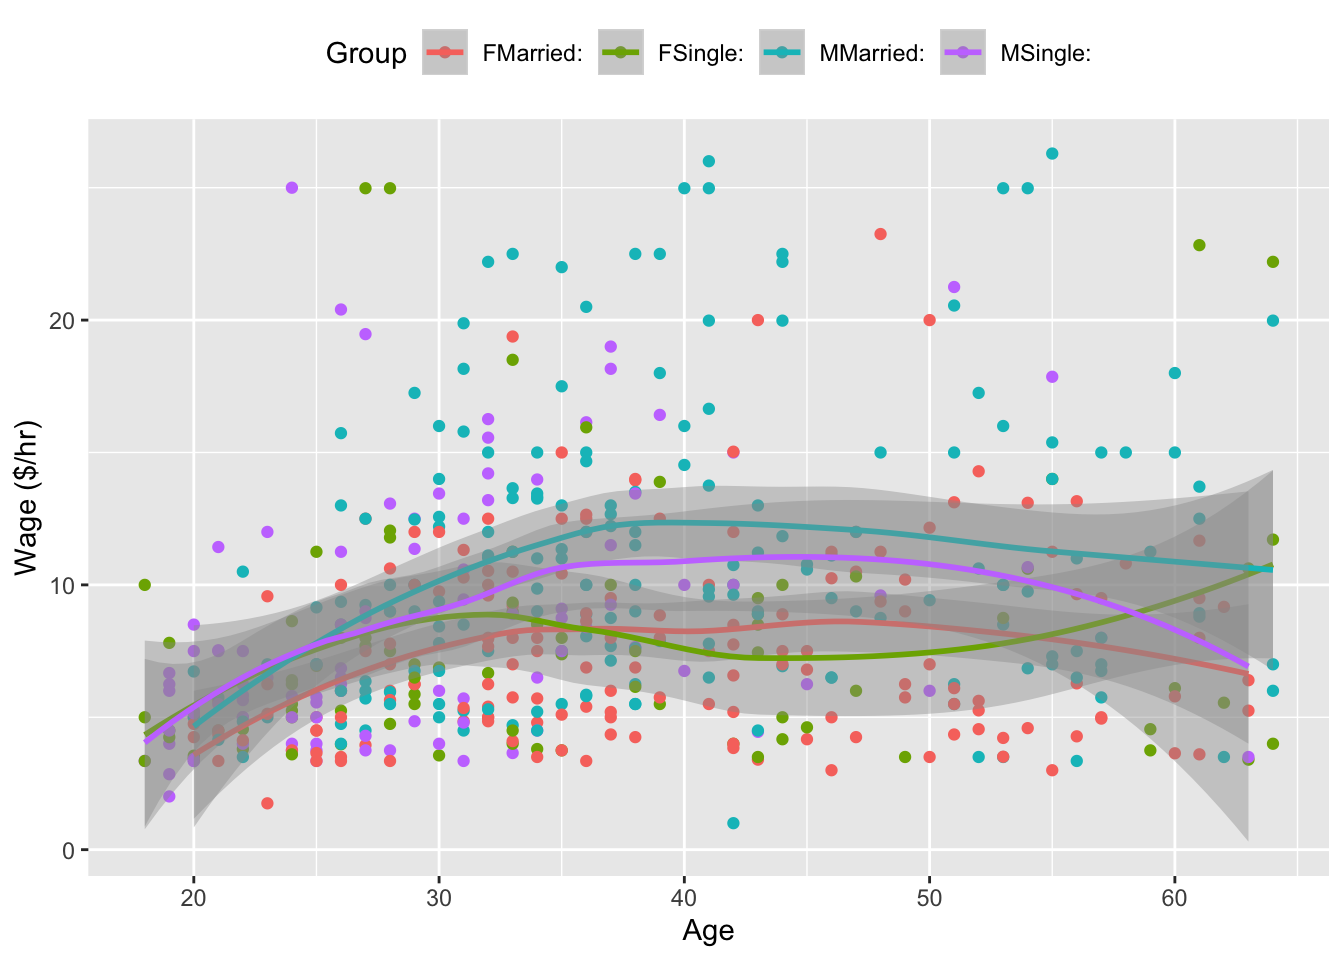 Hourly wages versus age, sex, and marital status.  It's hard to see a pattern among the data points; the models (shown as smooth curves) suggest that wages increase until age 40, then level off.